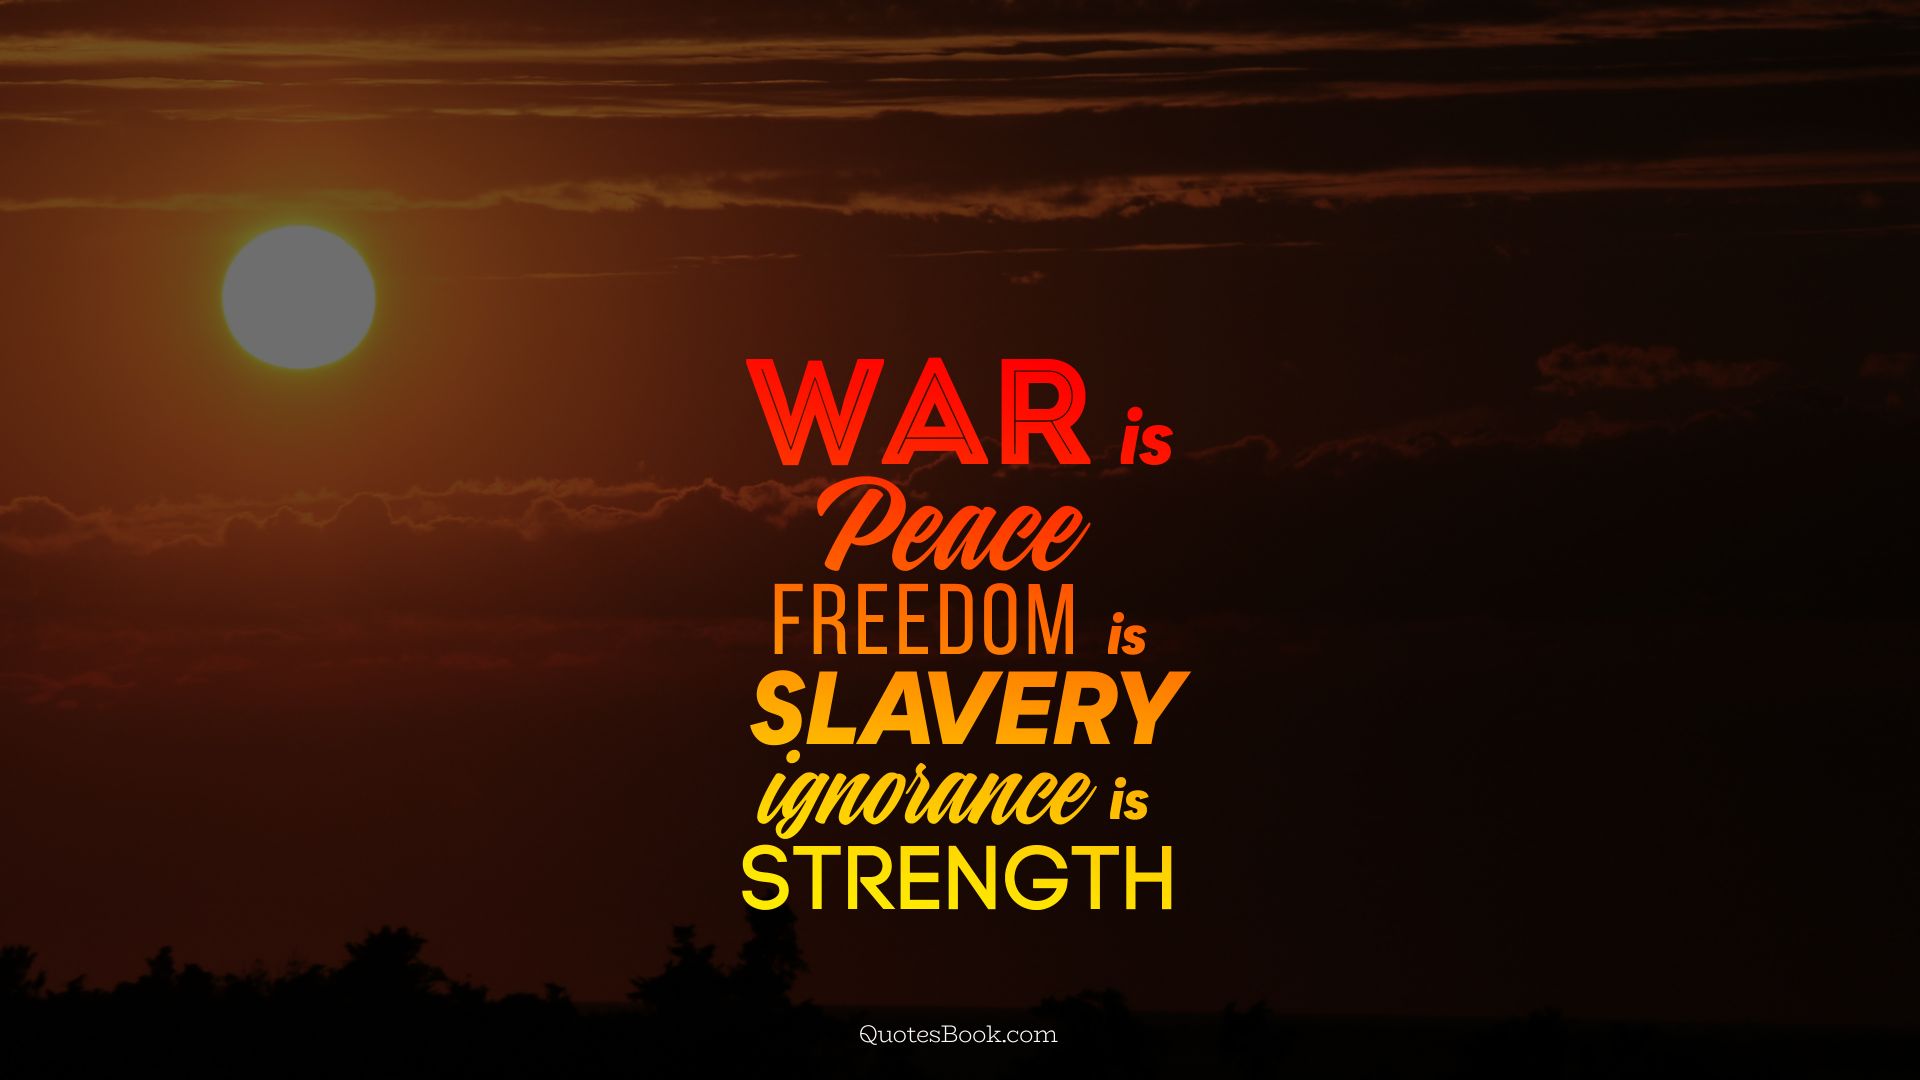 War is peace freedom is slavery ignorance is strength